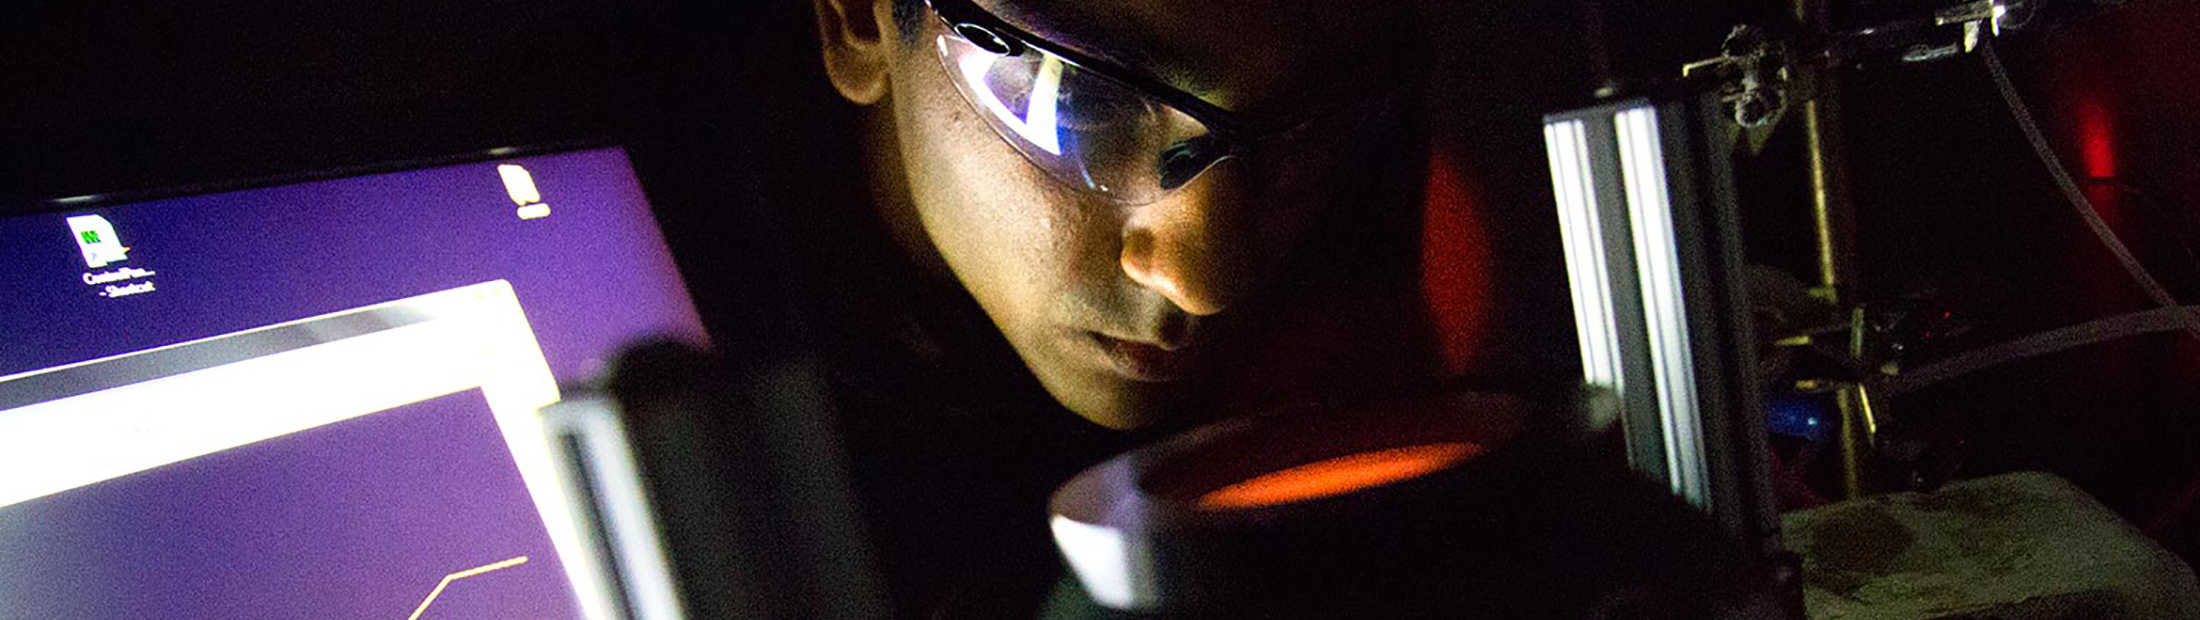 a close up image of the researcher umar aslam looking into the light sourse used during the experiments that revealed how the silver nanocubes captured energy and delivered it to the platinum shells